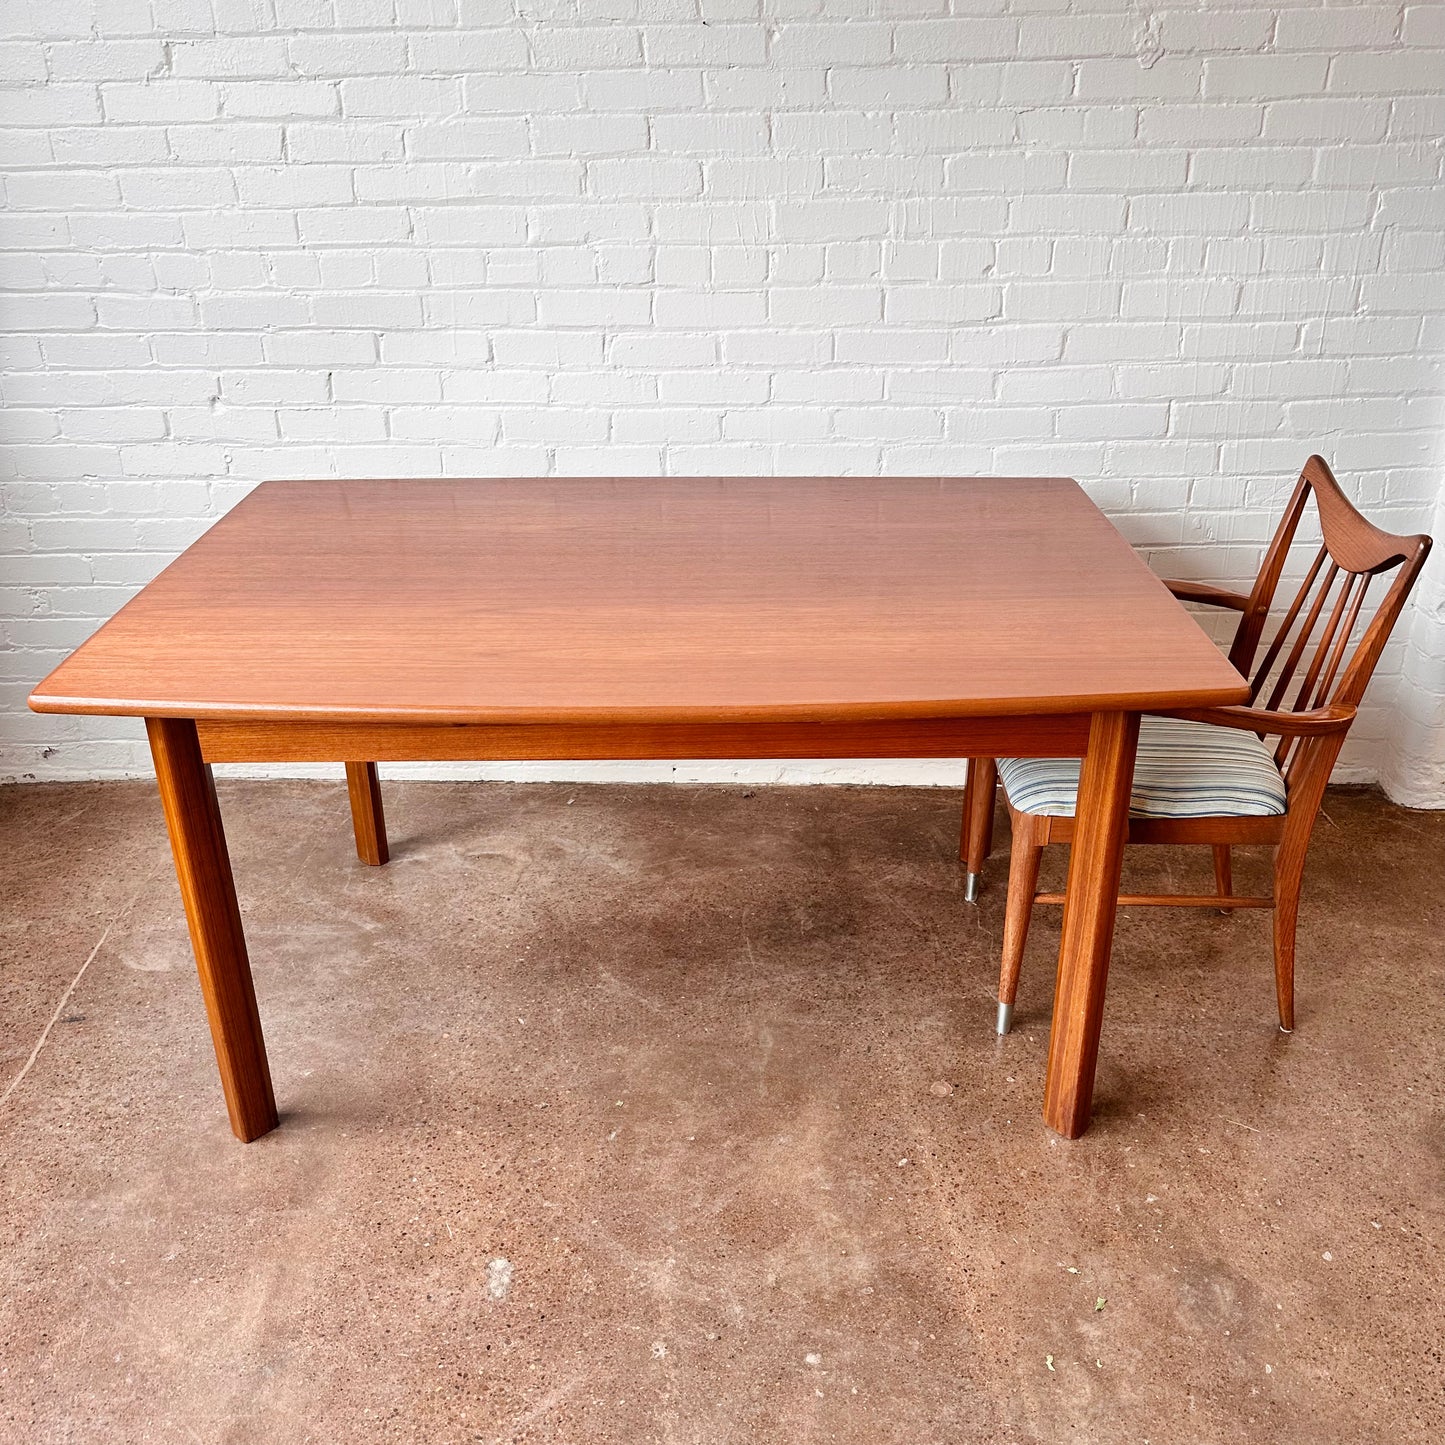 DANISH TEAK DINING TABLE WITH DRAW LEAVES (EXPANDABLE) BOAT-SHAPE - RESTORED